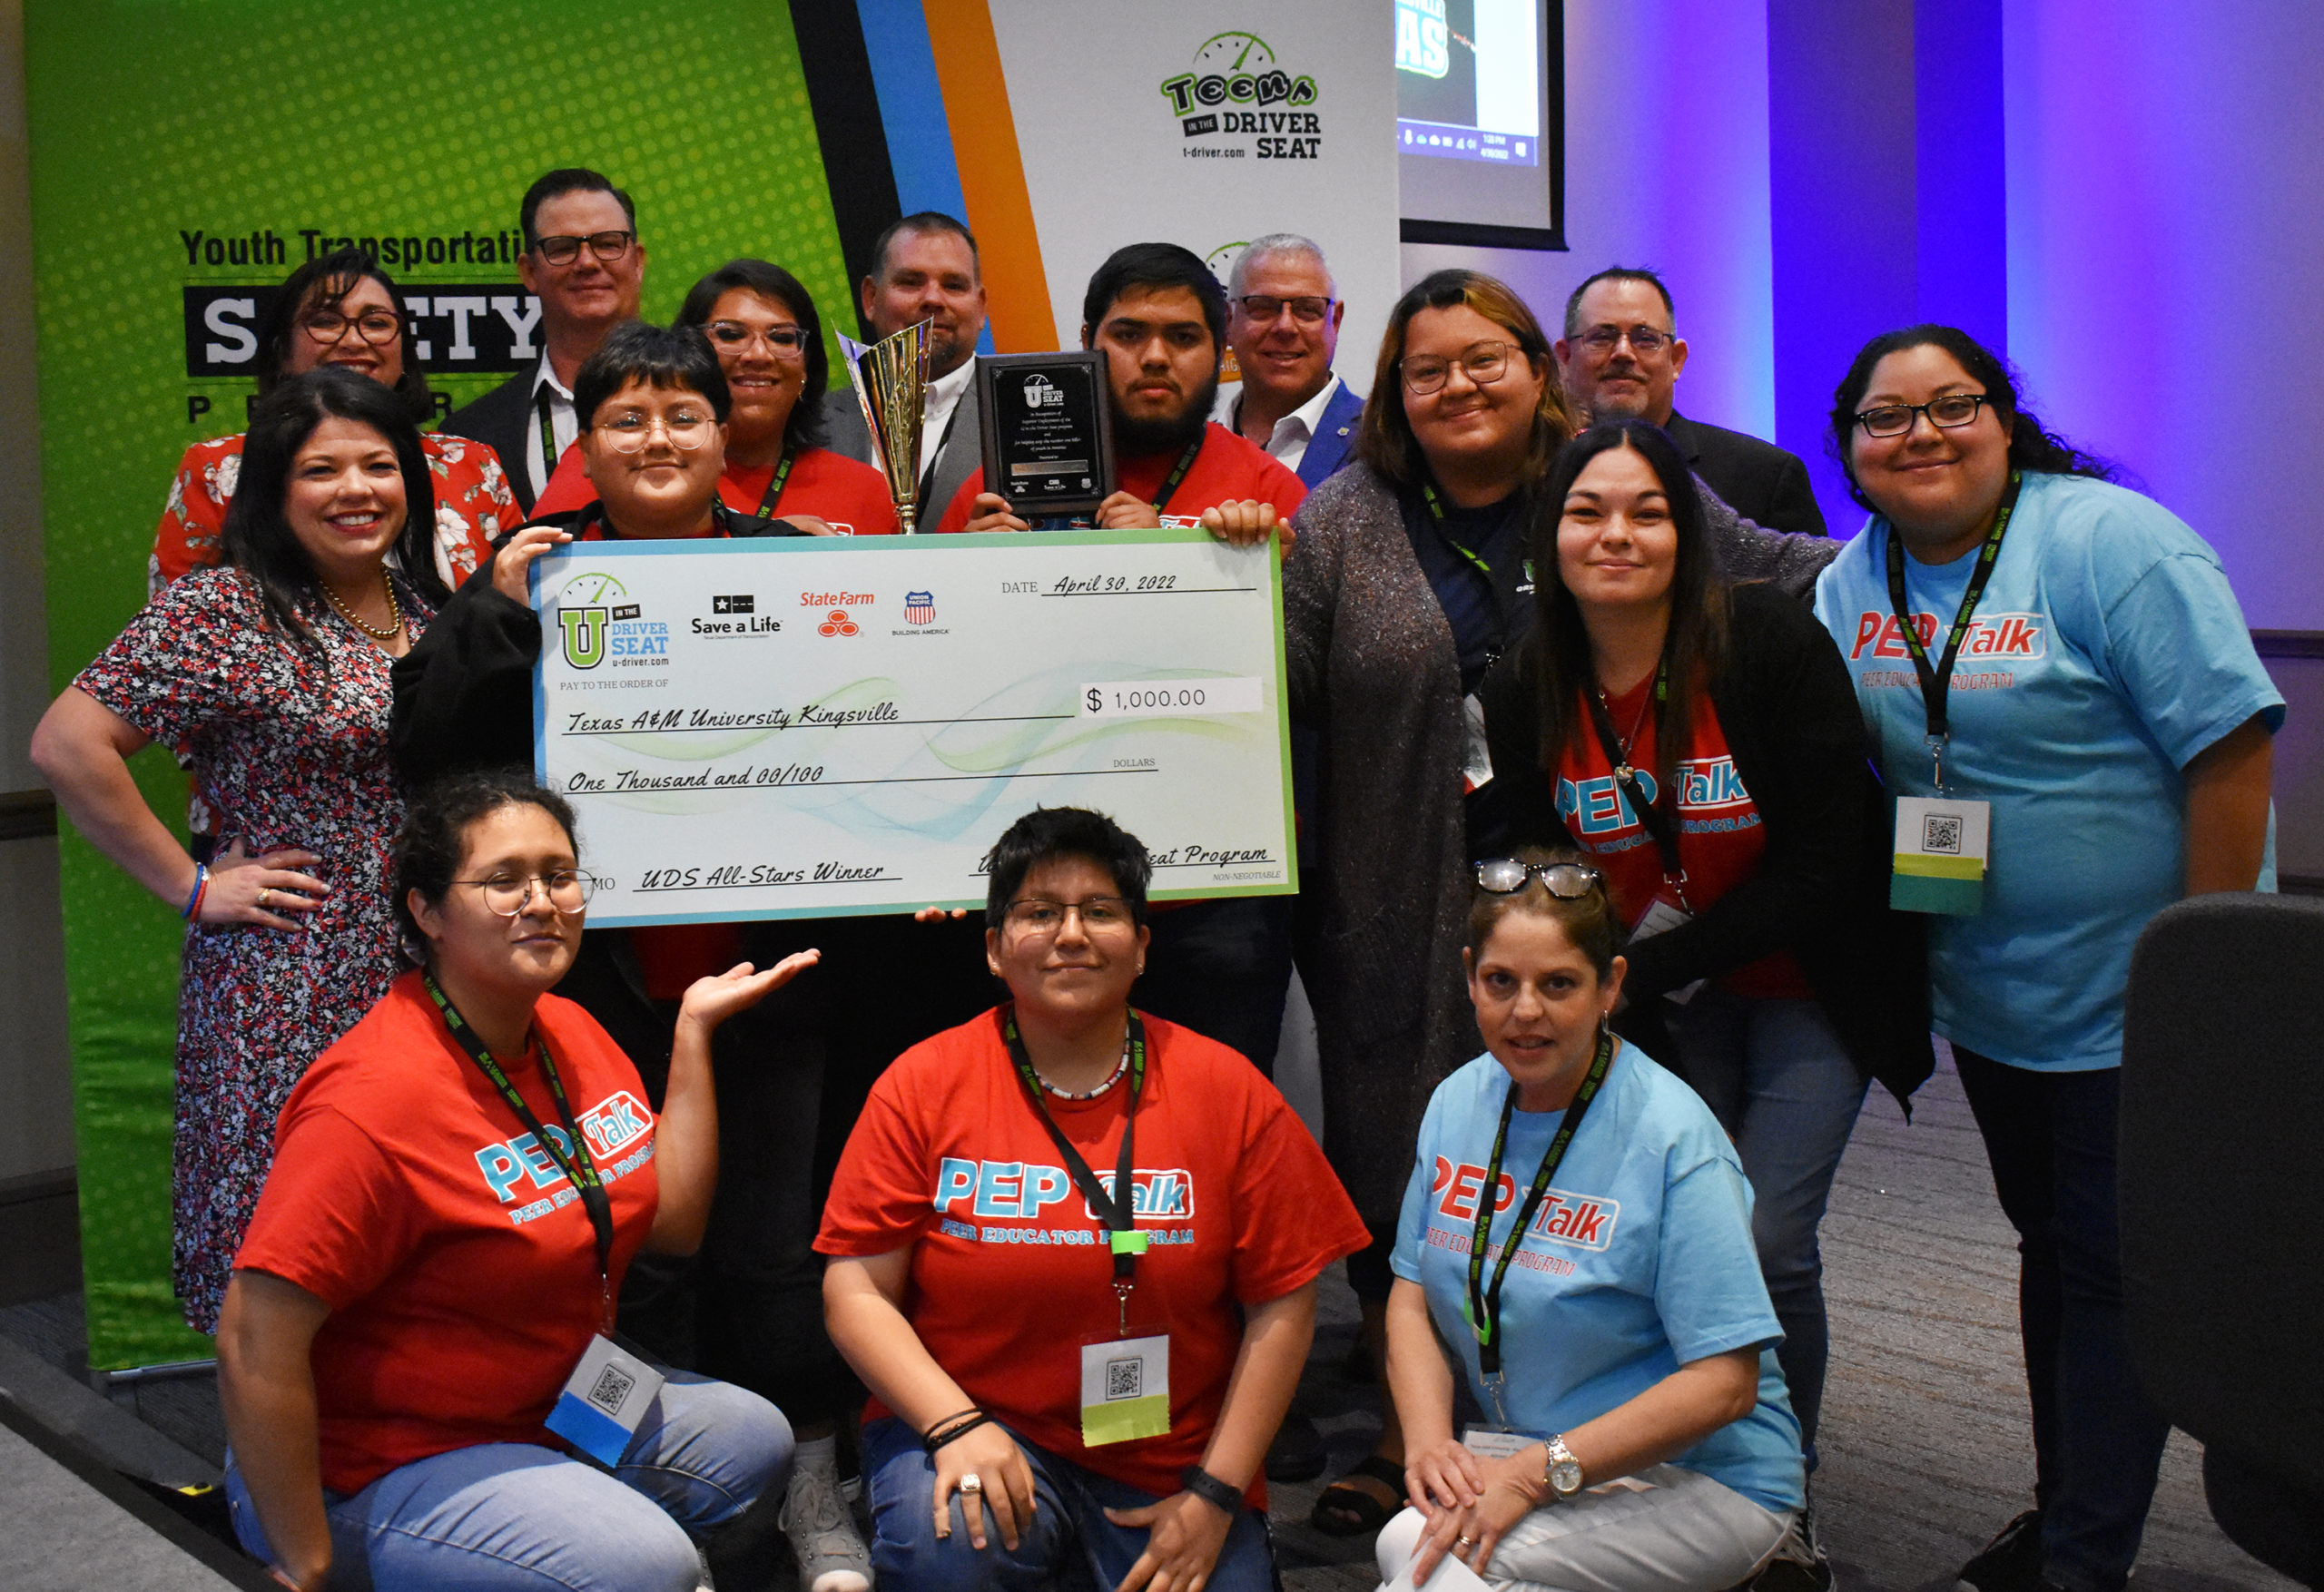 Group from Texas A&M University — Kingsville holding an All-Star winner check in front of a Youth Transportation Safety Program sign.